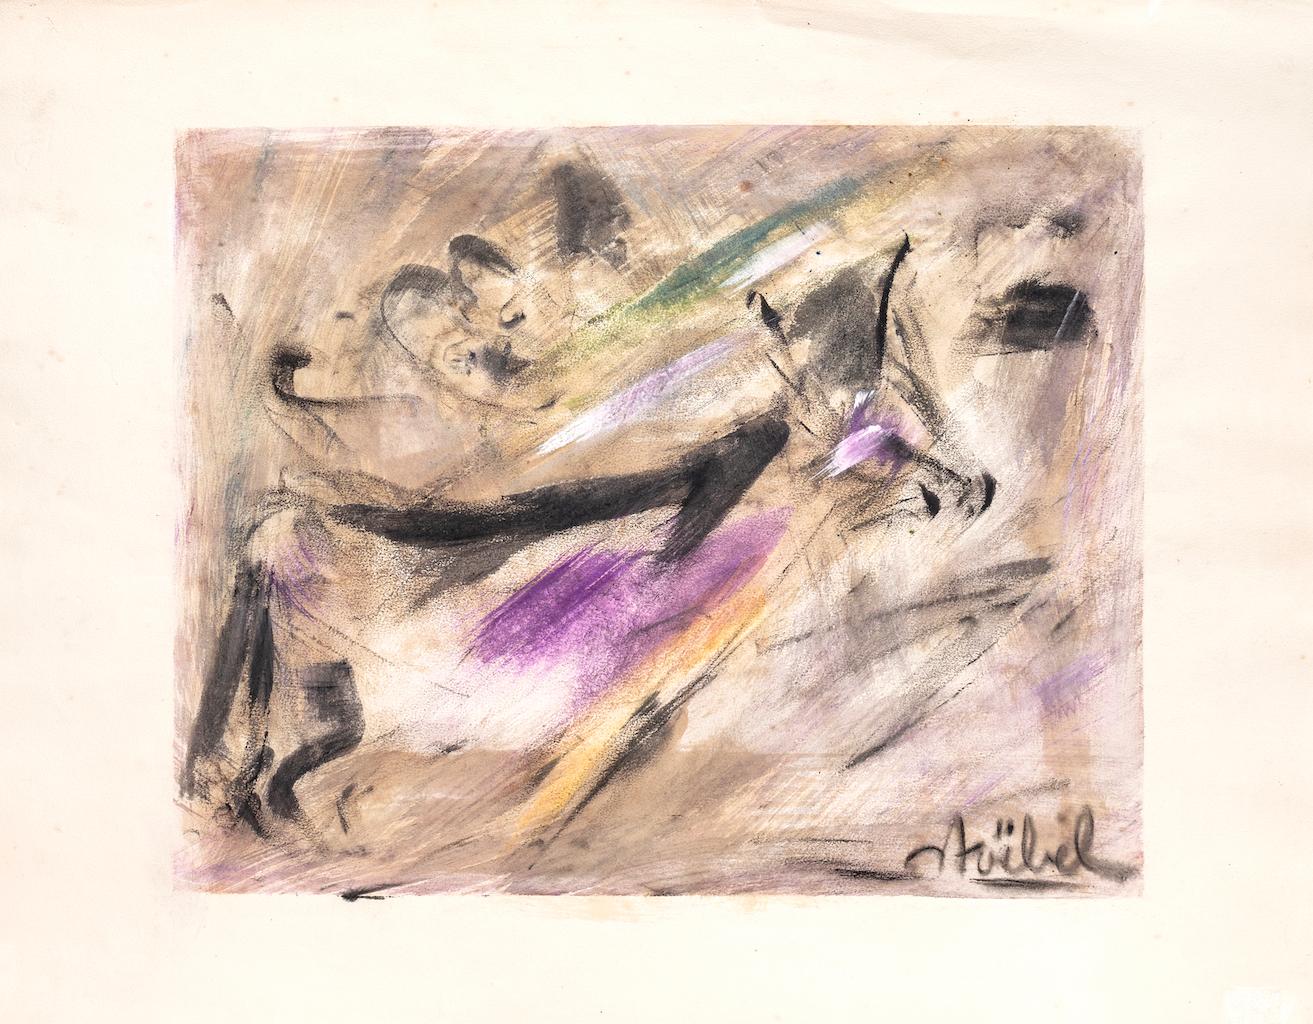 Edgar Stoëbel Abstract Drawing - Composition - Original Mixed Media by Edgar Stoebel - 1970s